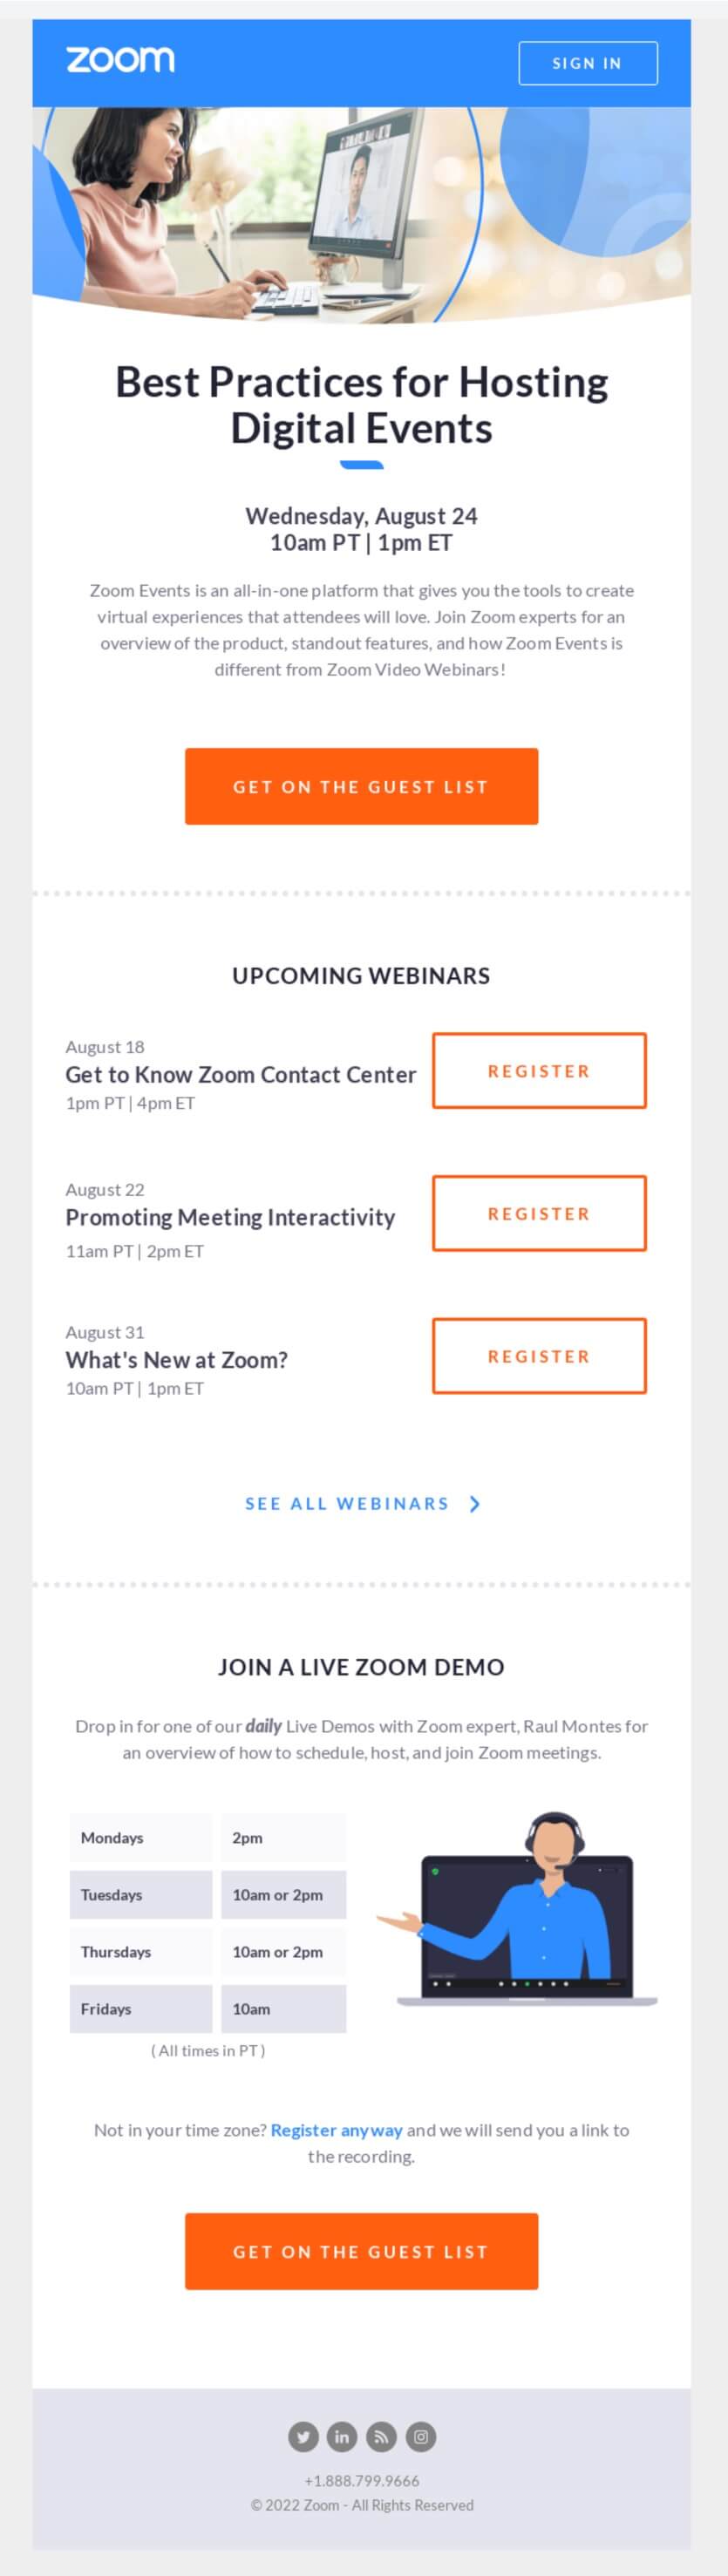 A webinar invitation B2B email from Zoom